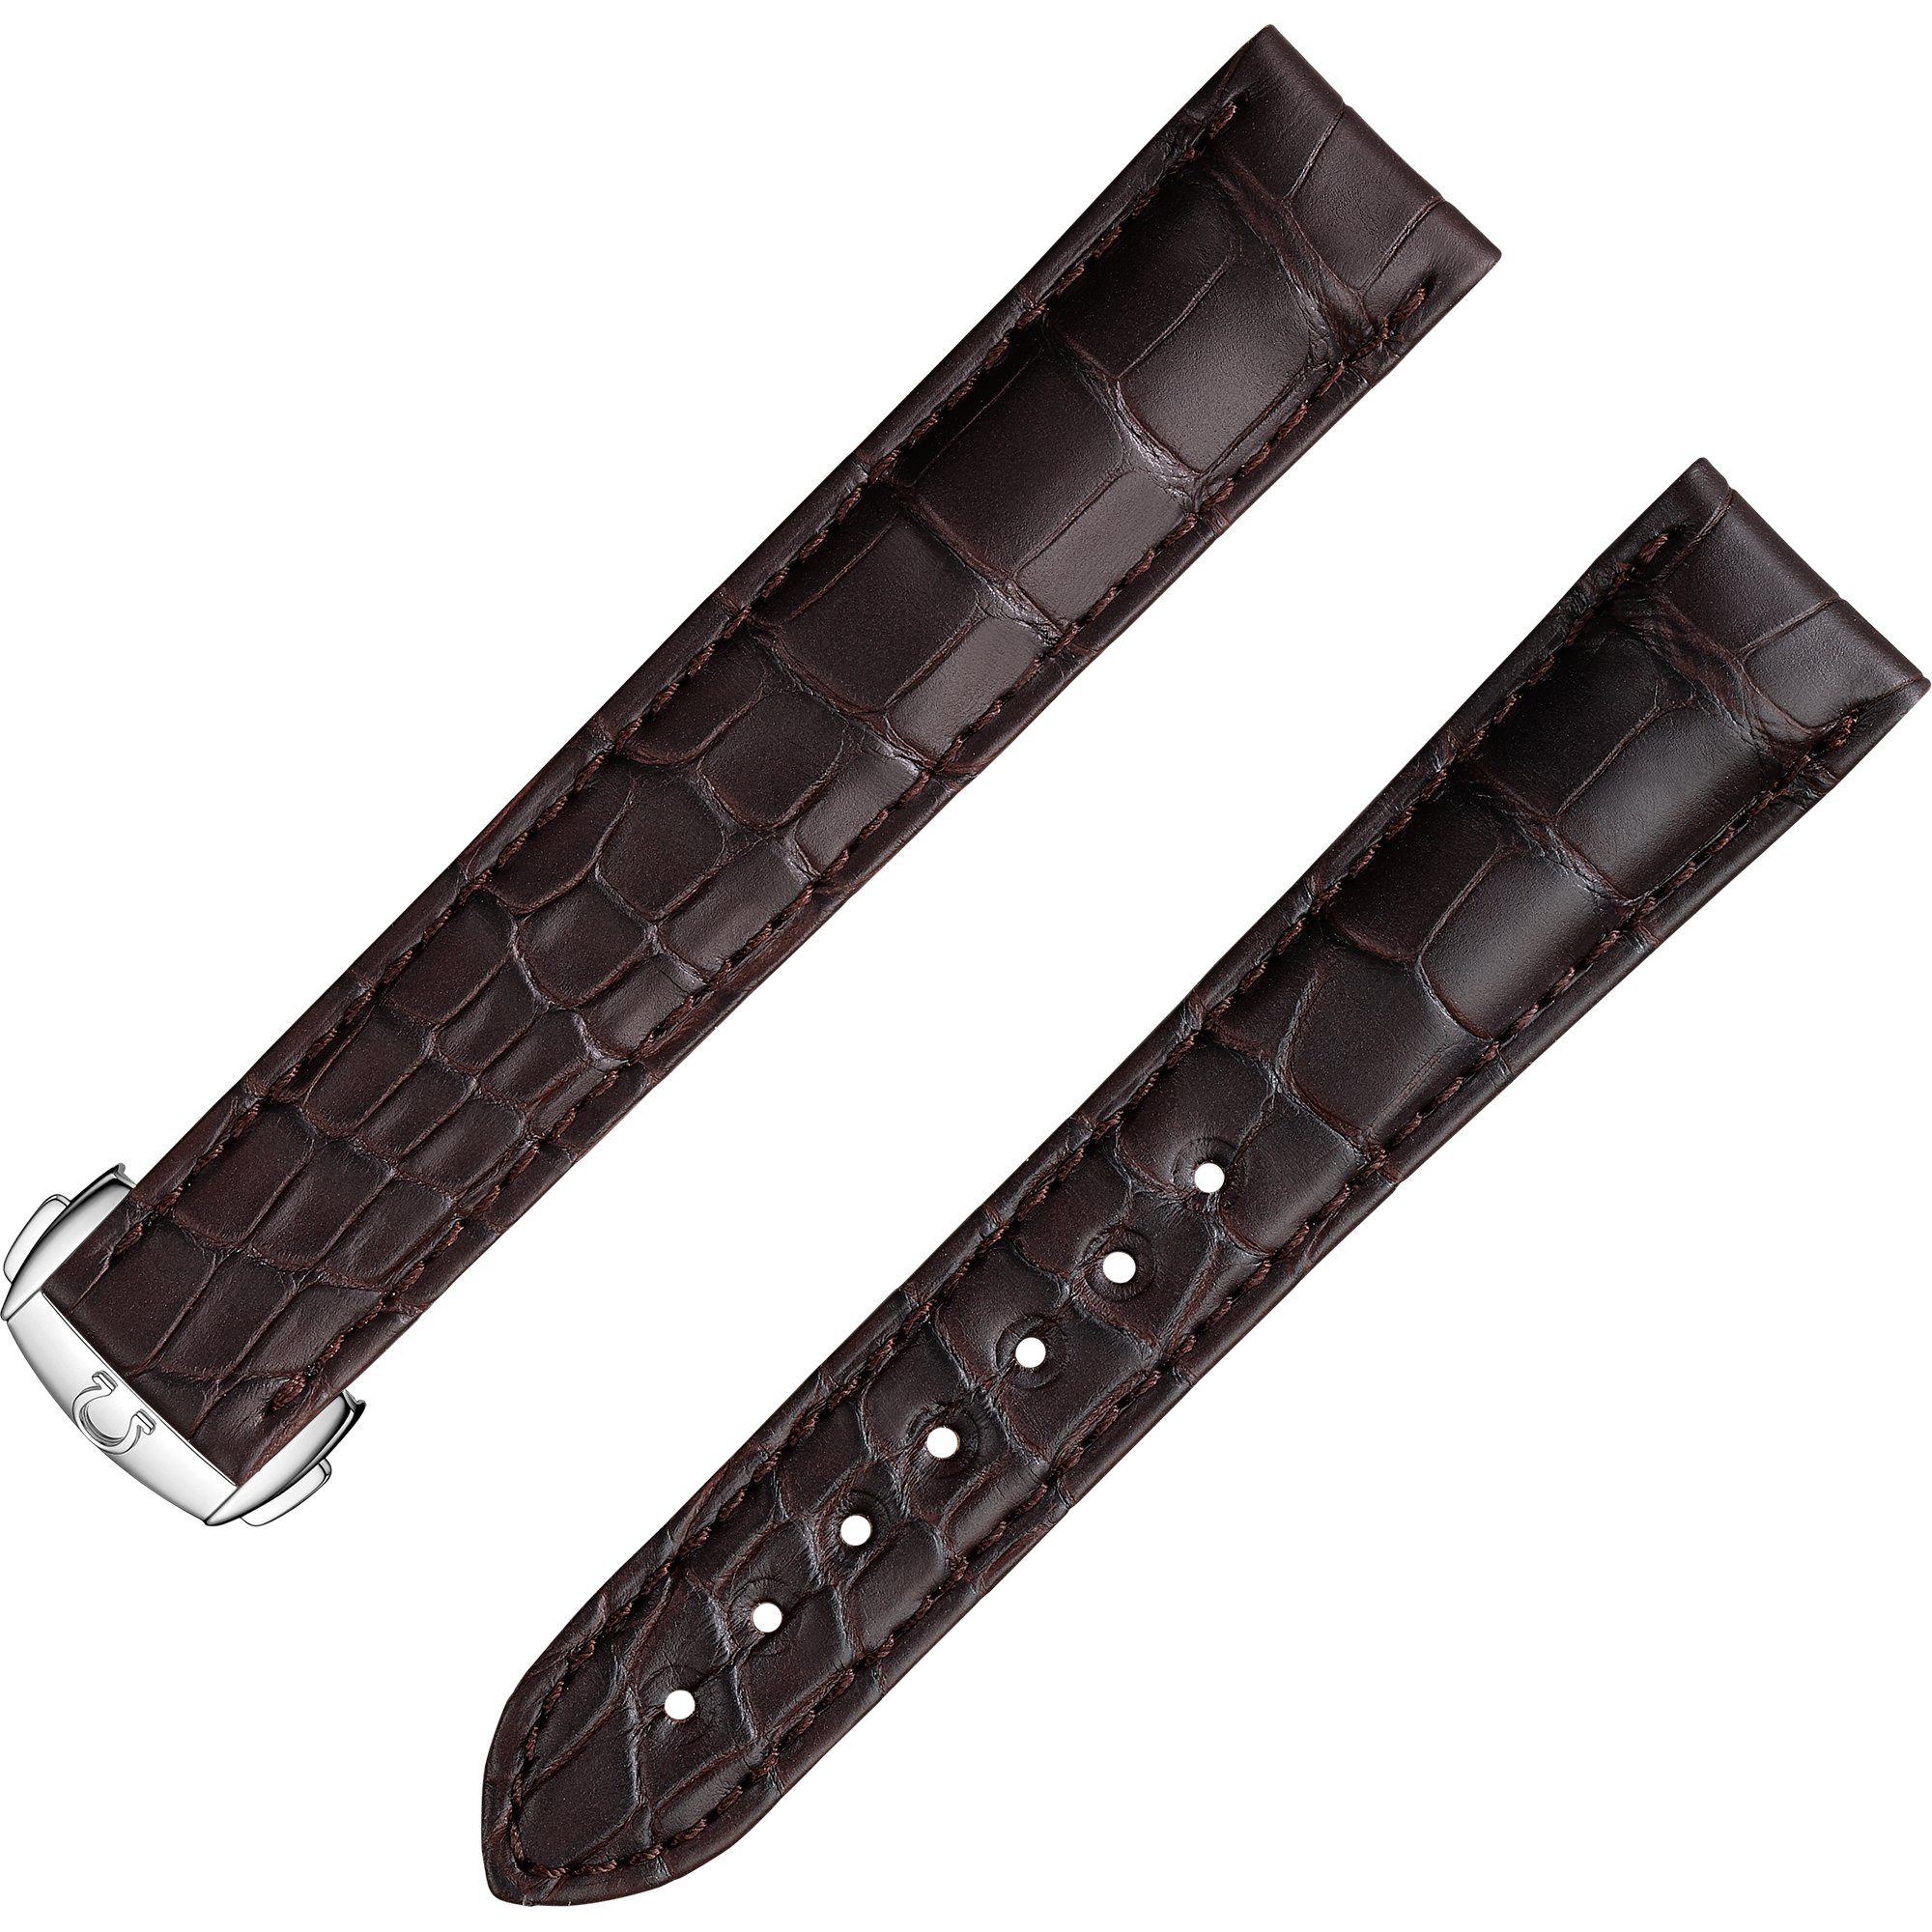 Two-piece strap - Brown alligator leather strap with foldover clasp - 98000275W